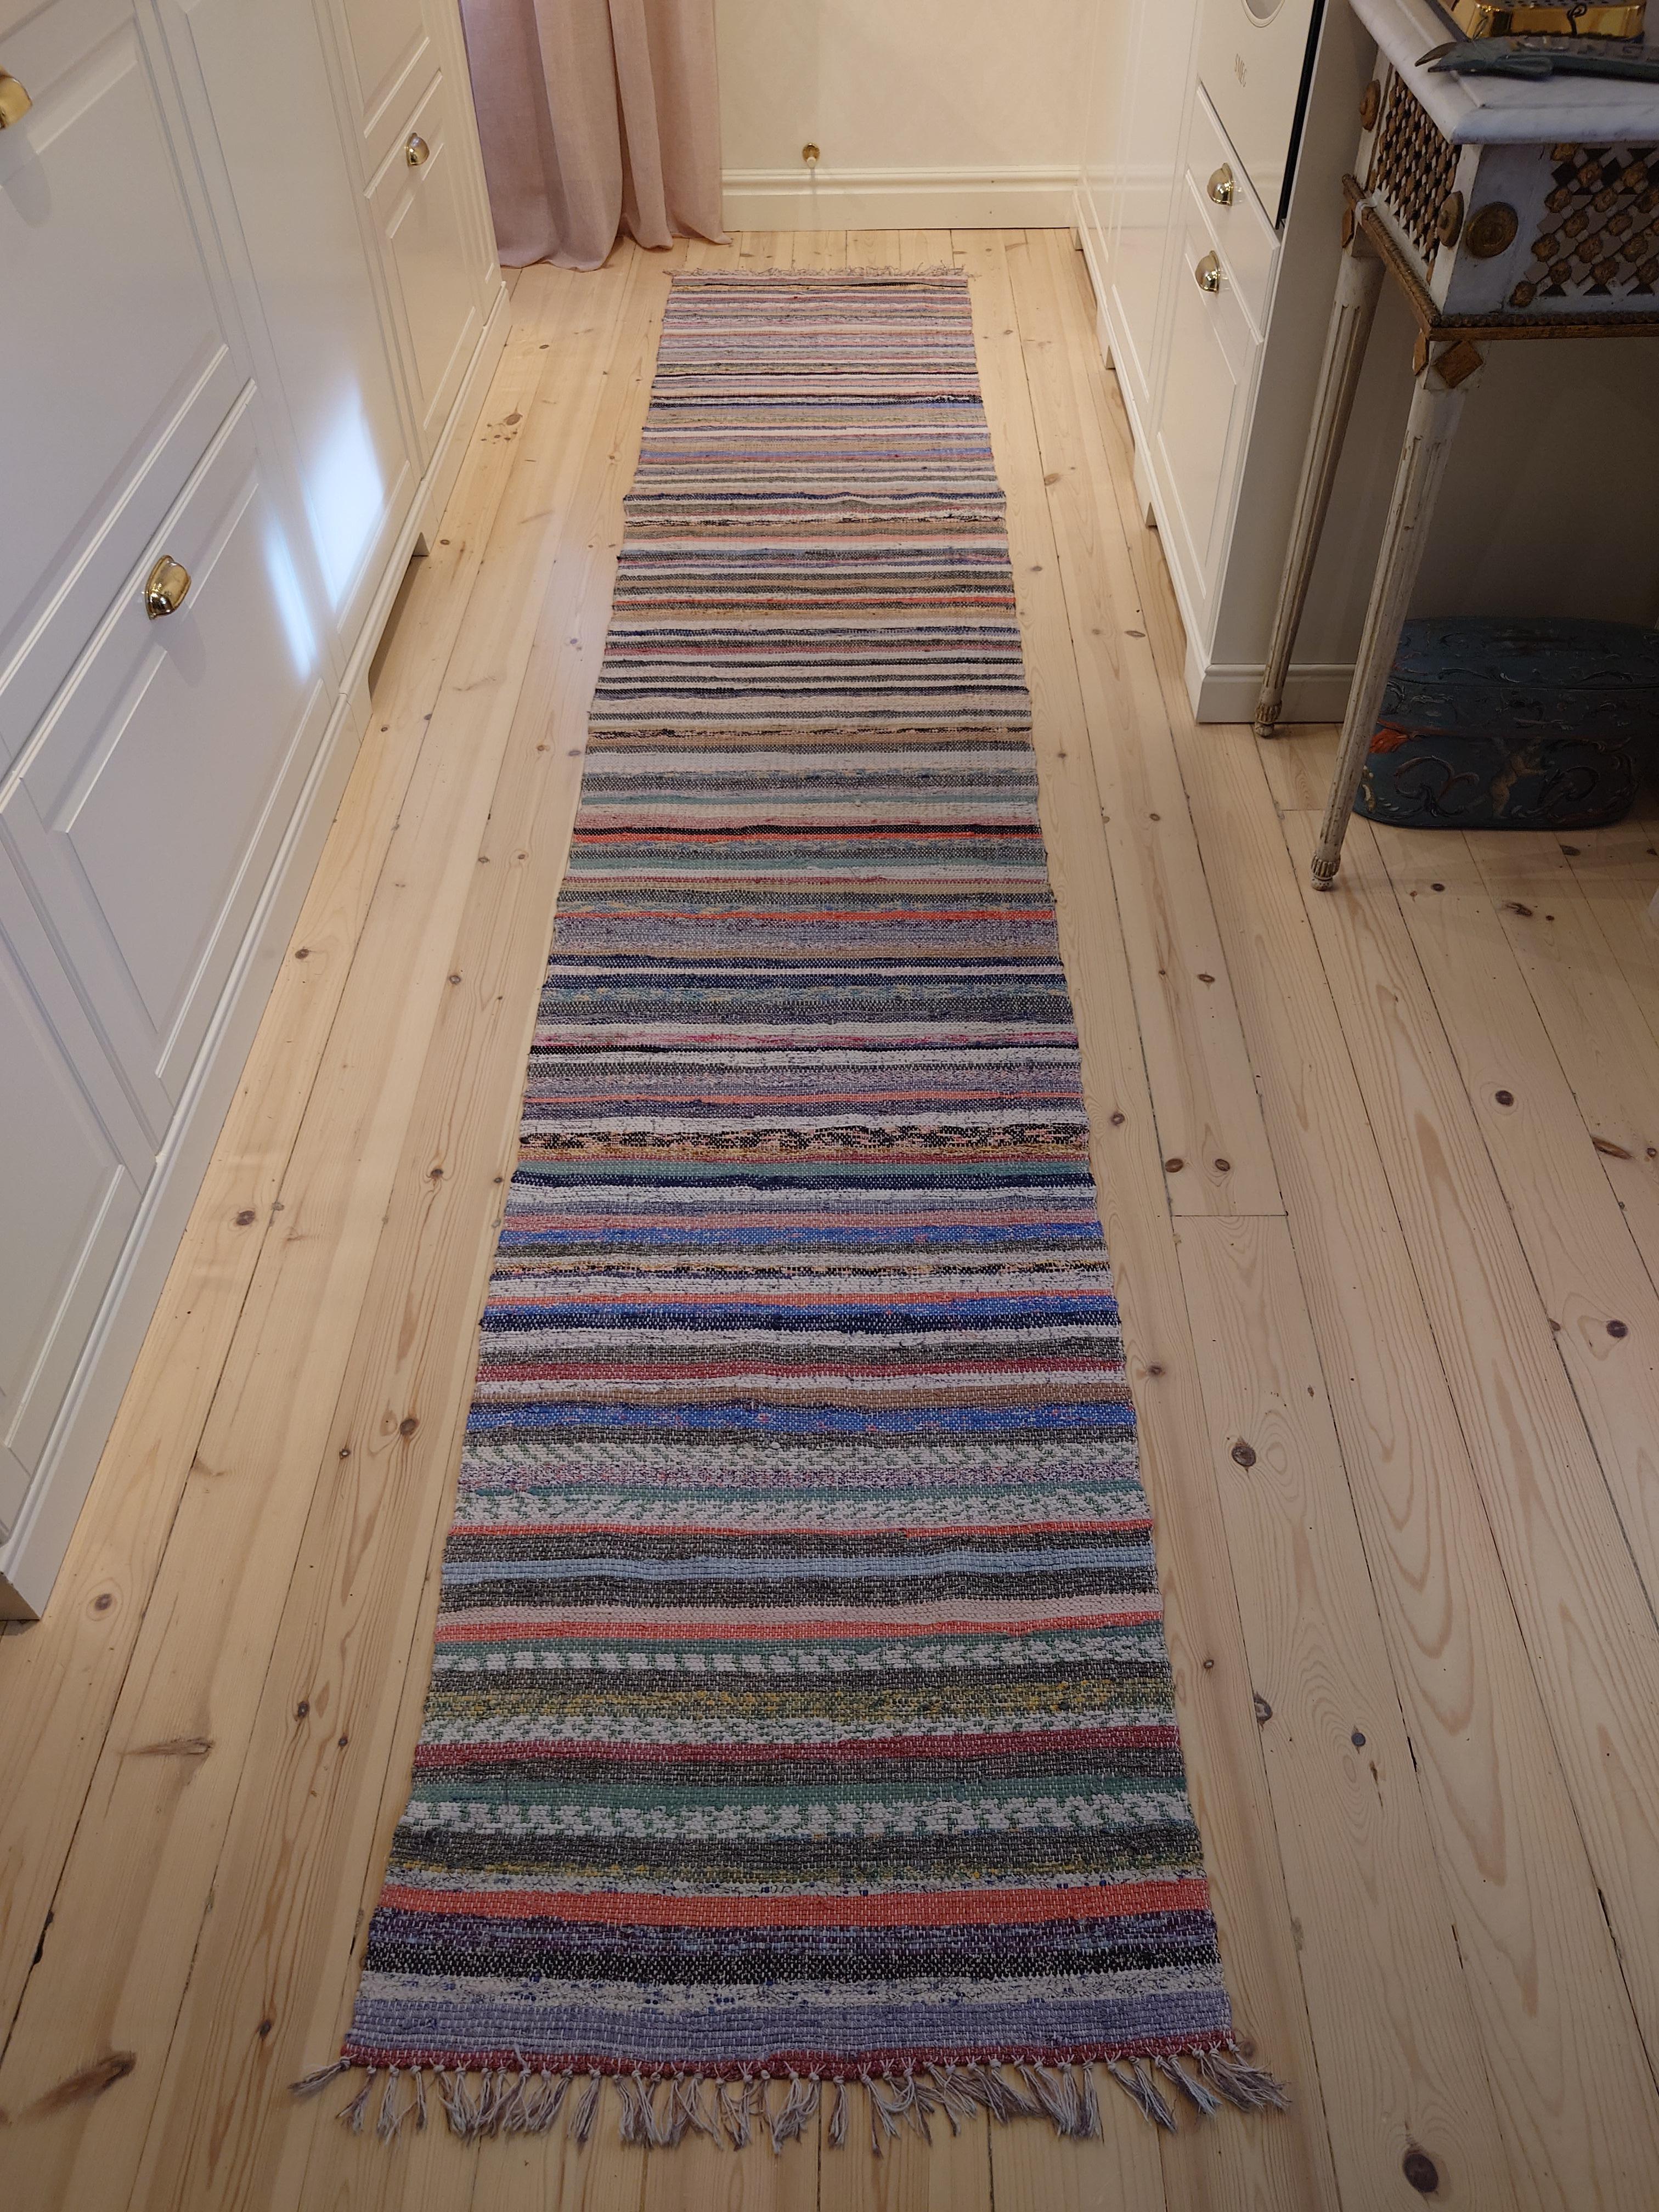 A fantastically Swedish Rag Rug in beautiful color & pattern.
Handwoven in Boden Northern Sweden .
The rug is freshly washed.
Vintage & antique Swedish Rag Rugs from Sweden comes in a variety of color shemes and patterns. They are woven traditional